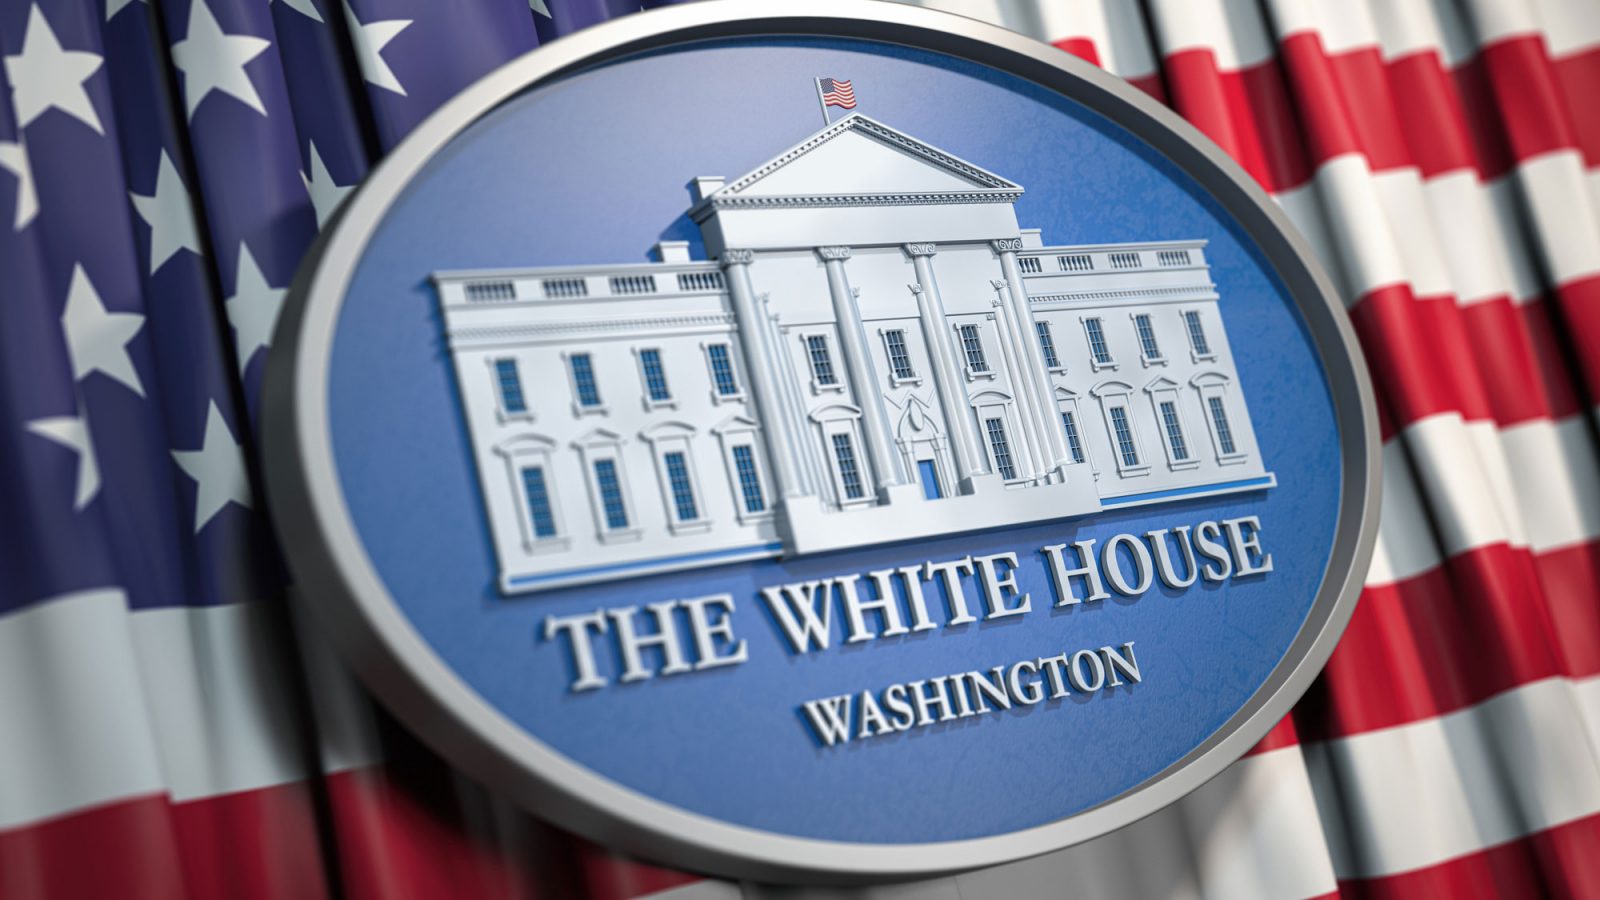 Oval White House plaque lies against an American flag backdrop.